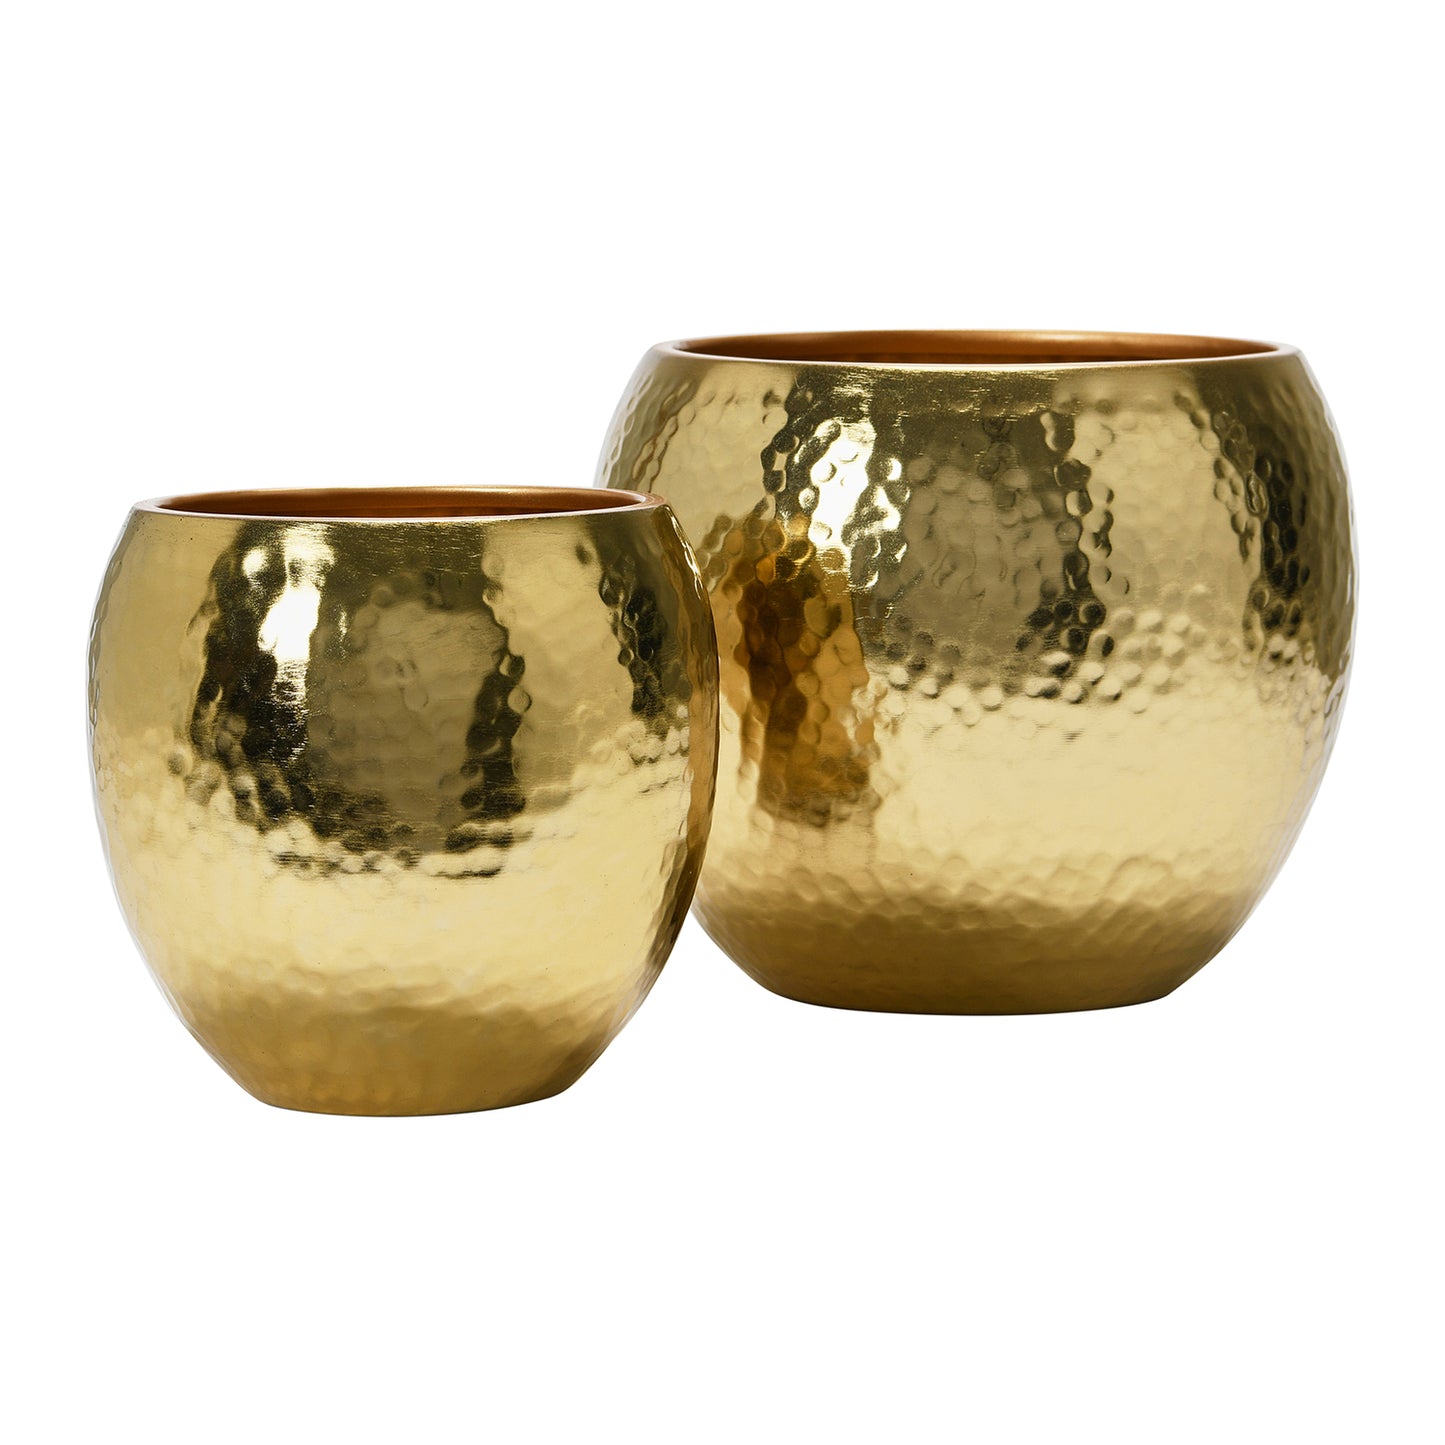 Hammered Metal Planters, Brass Finish, Set of 2